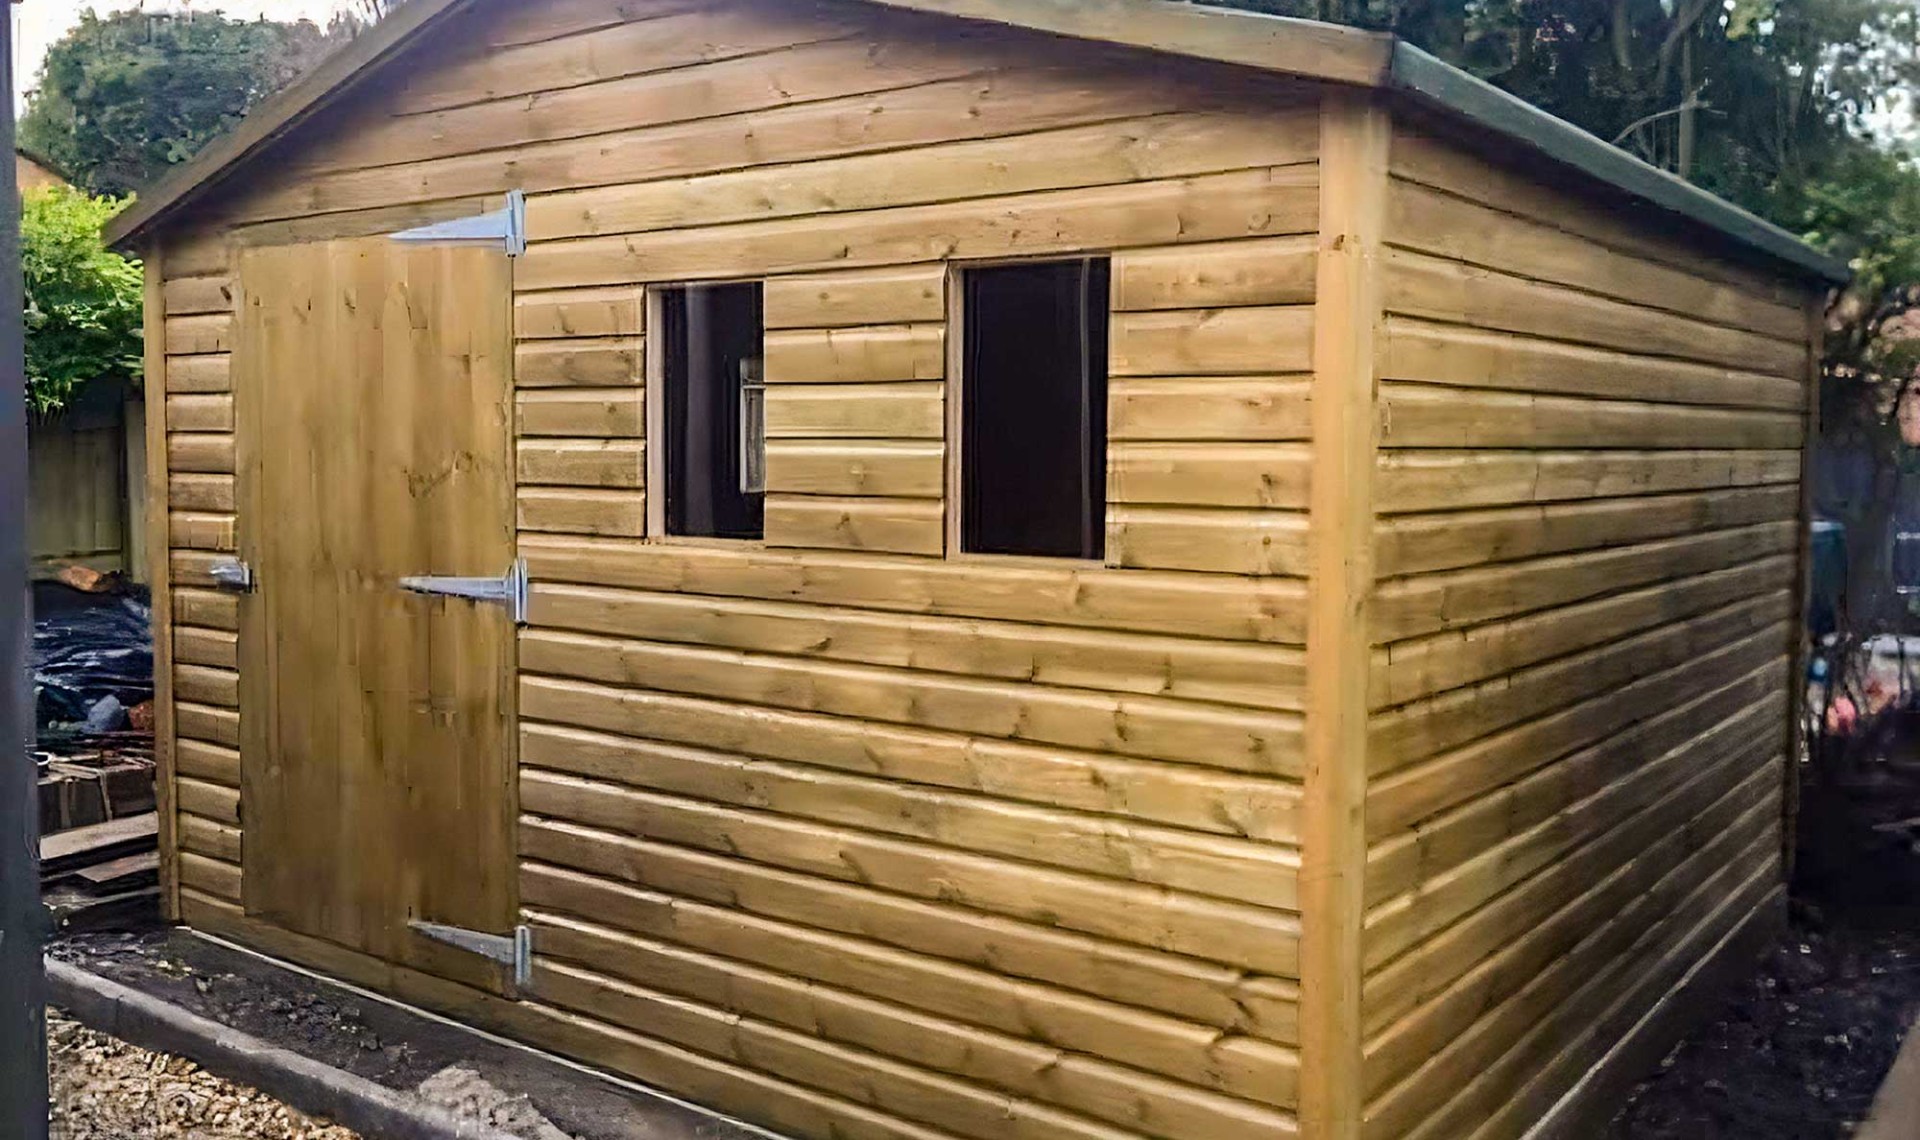 Large workshop shed in garden with two front windows.